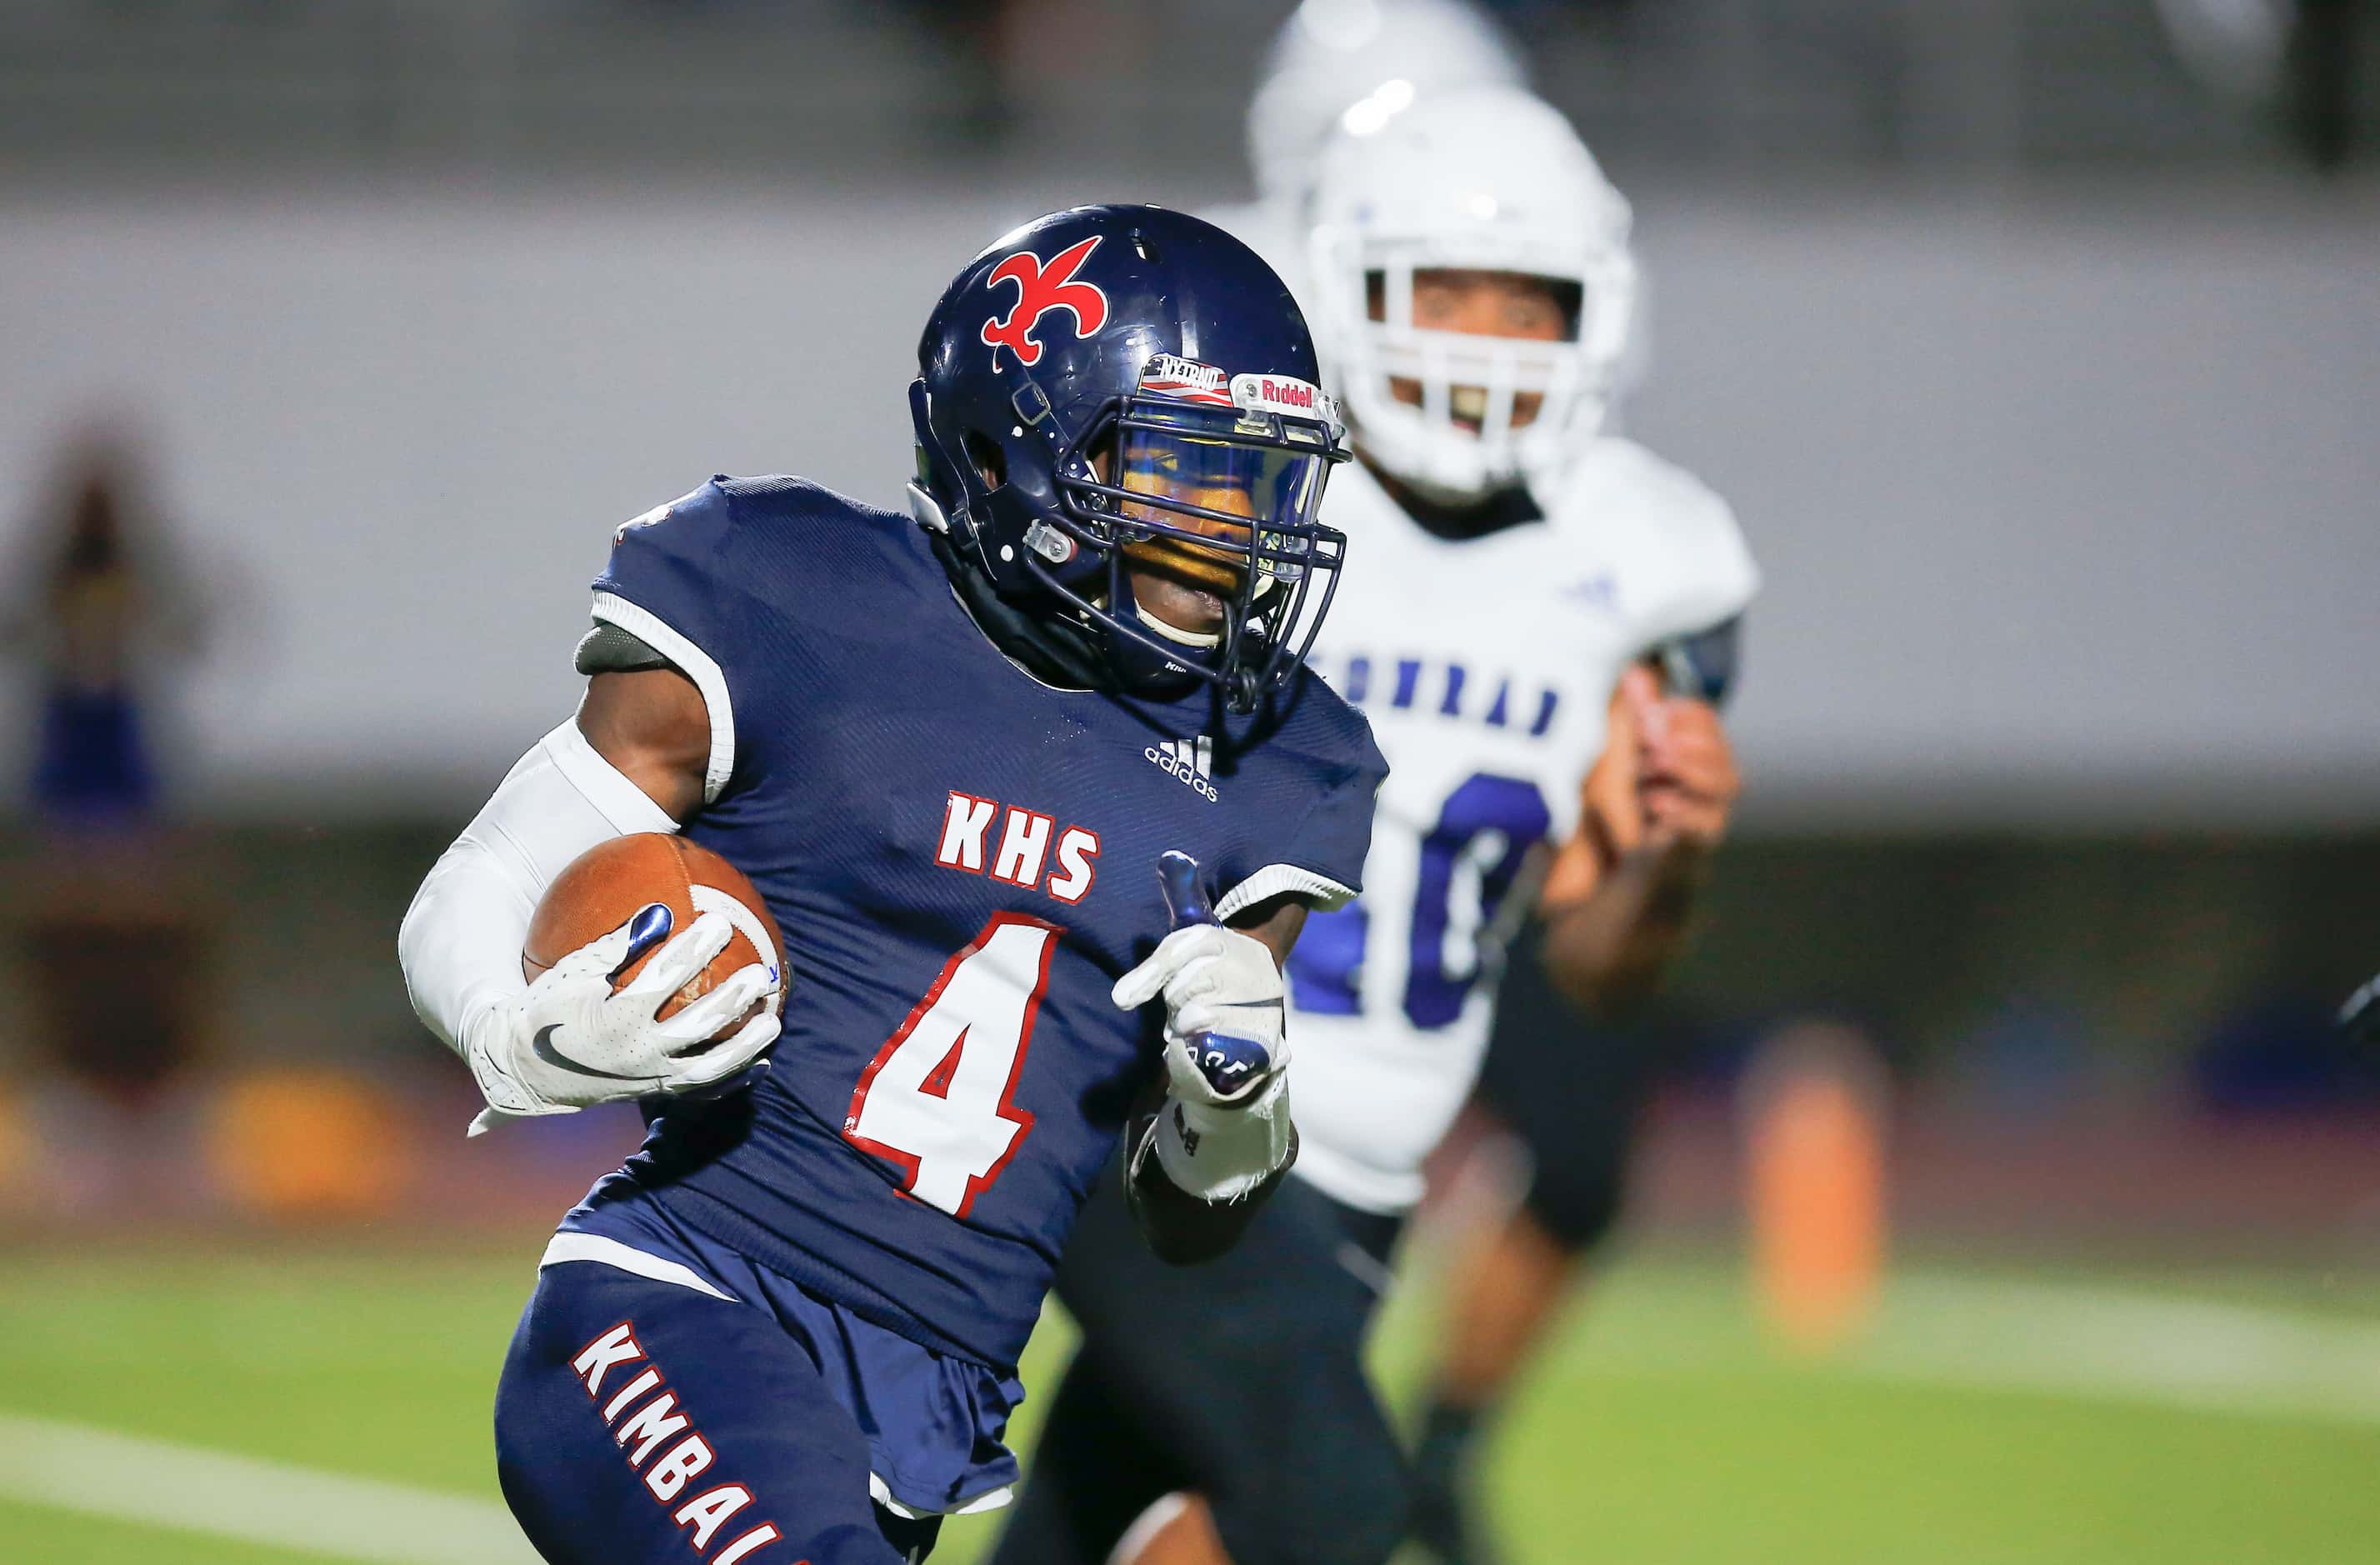 Kimball senior running back Niteroi Davis (4) carries the ball during the first half of a...